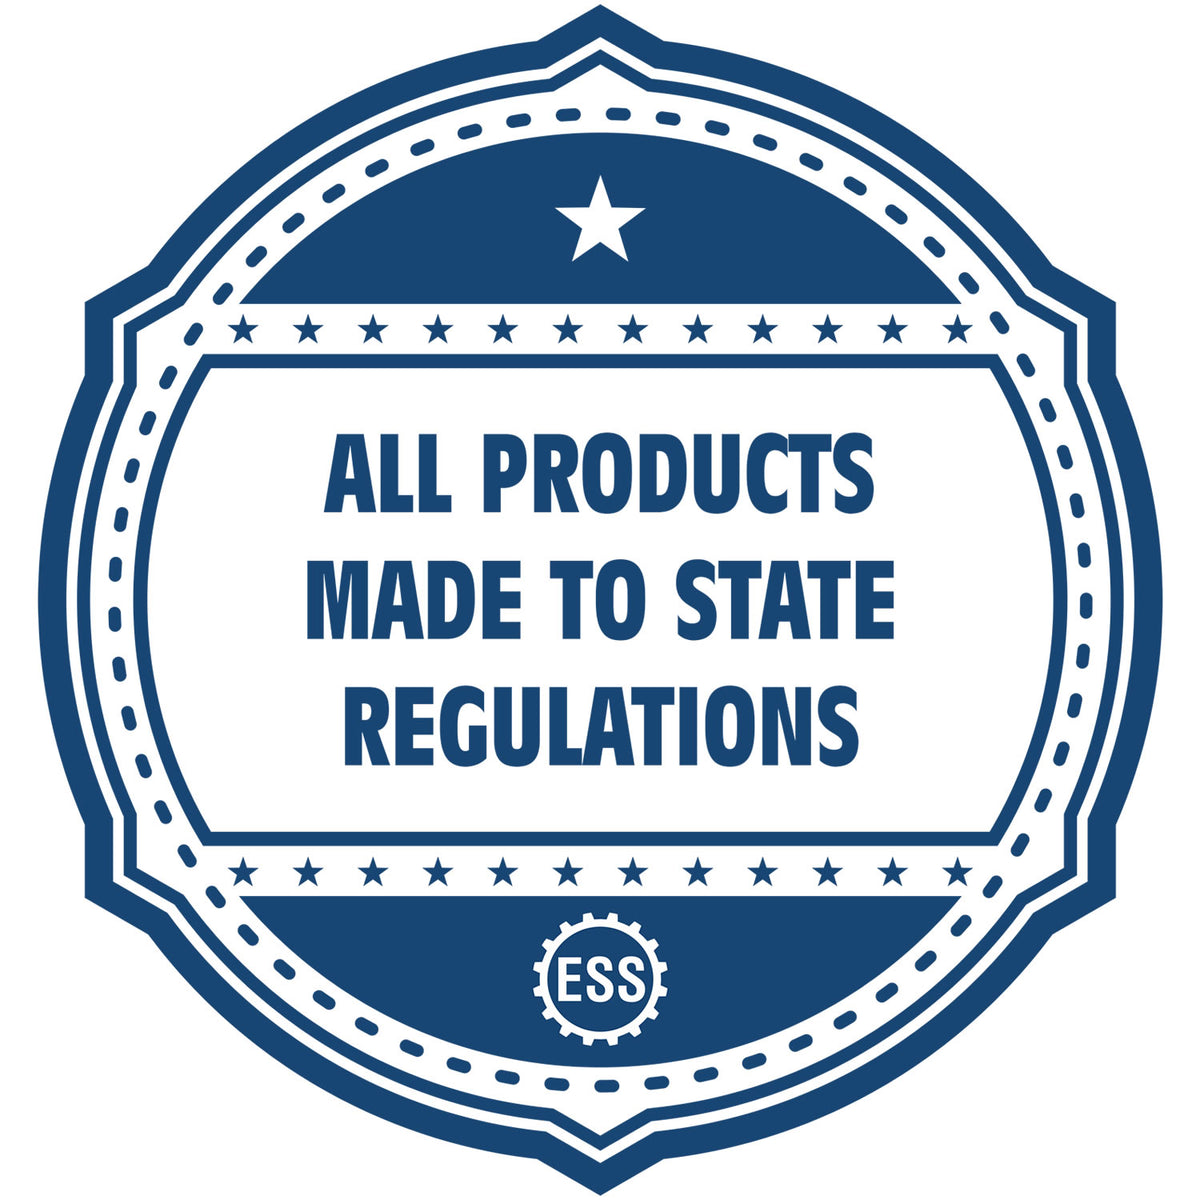 An icon or badge element for the Slim Pre-Inked Georgia Landscape Architect Seal Stamp showing that this product is made in compliance with state regulations.